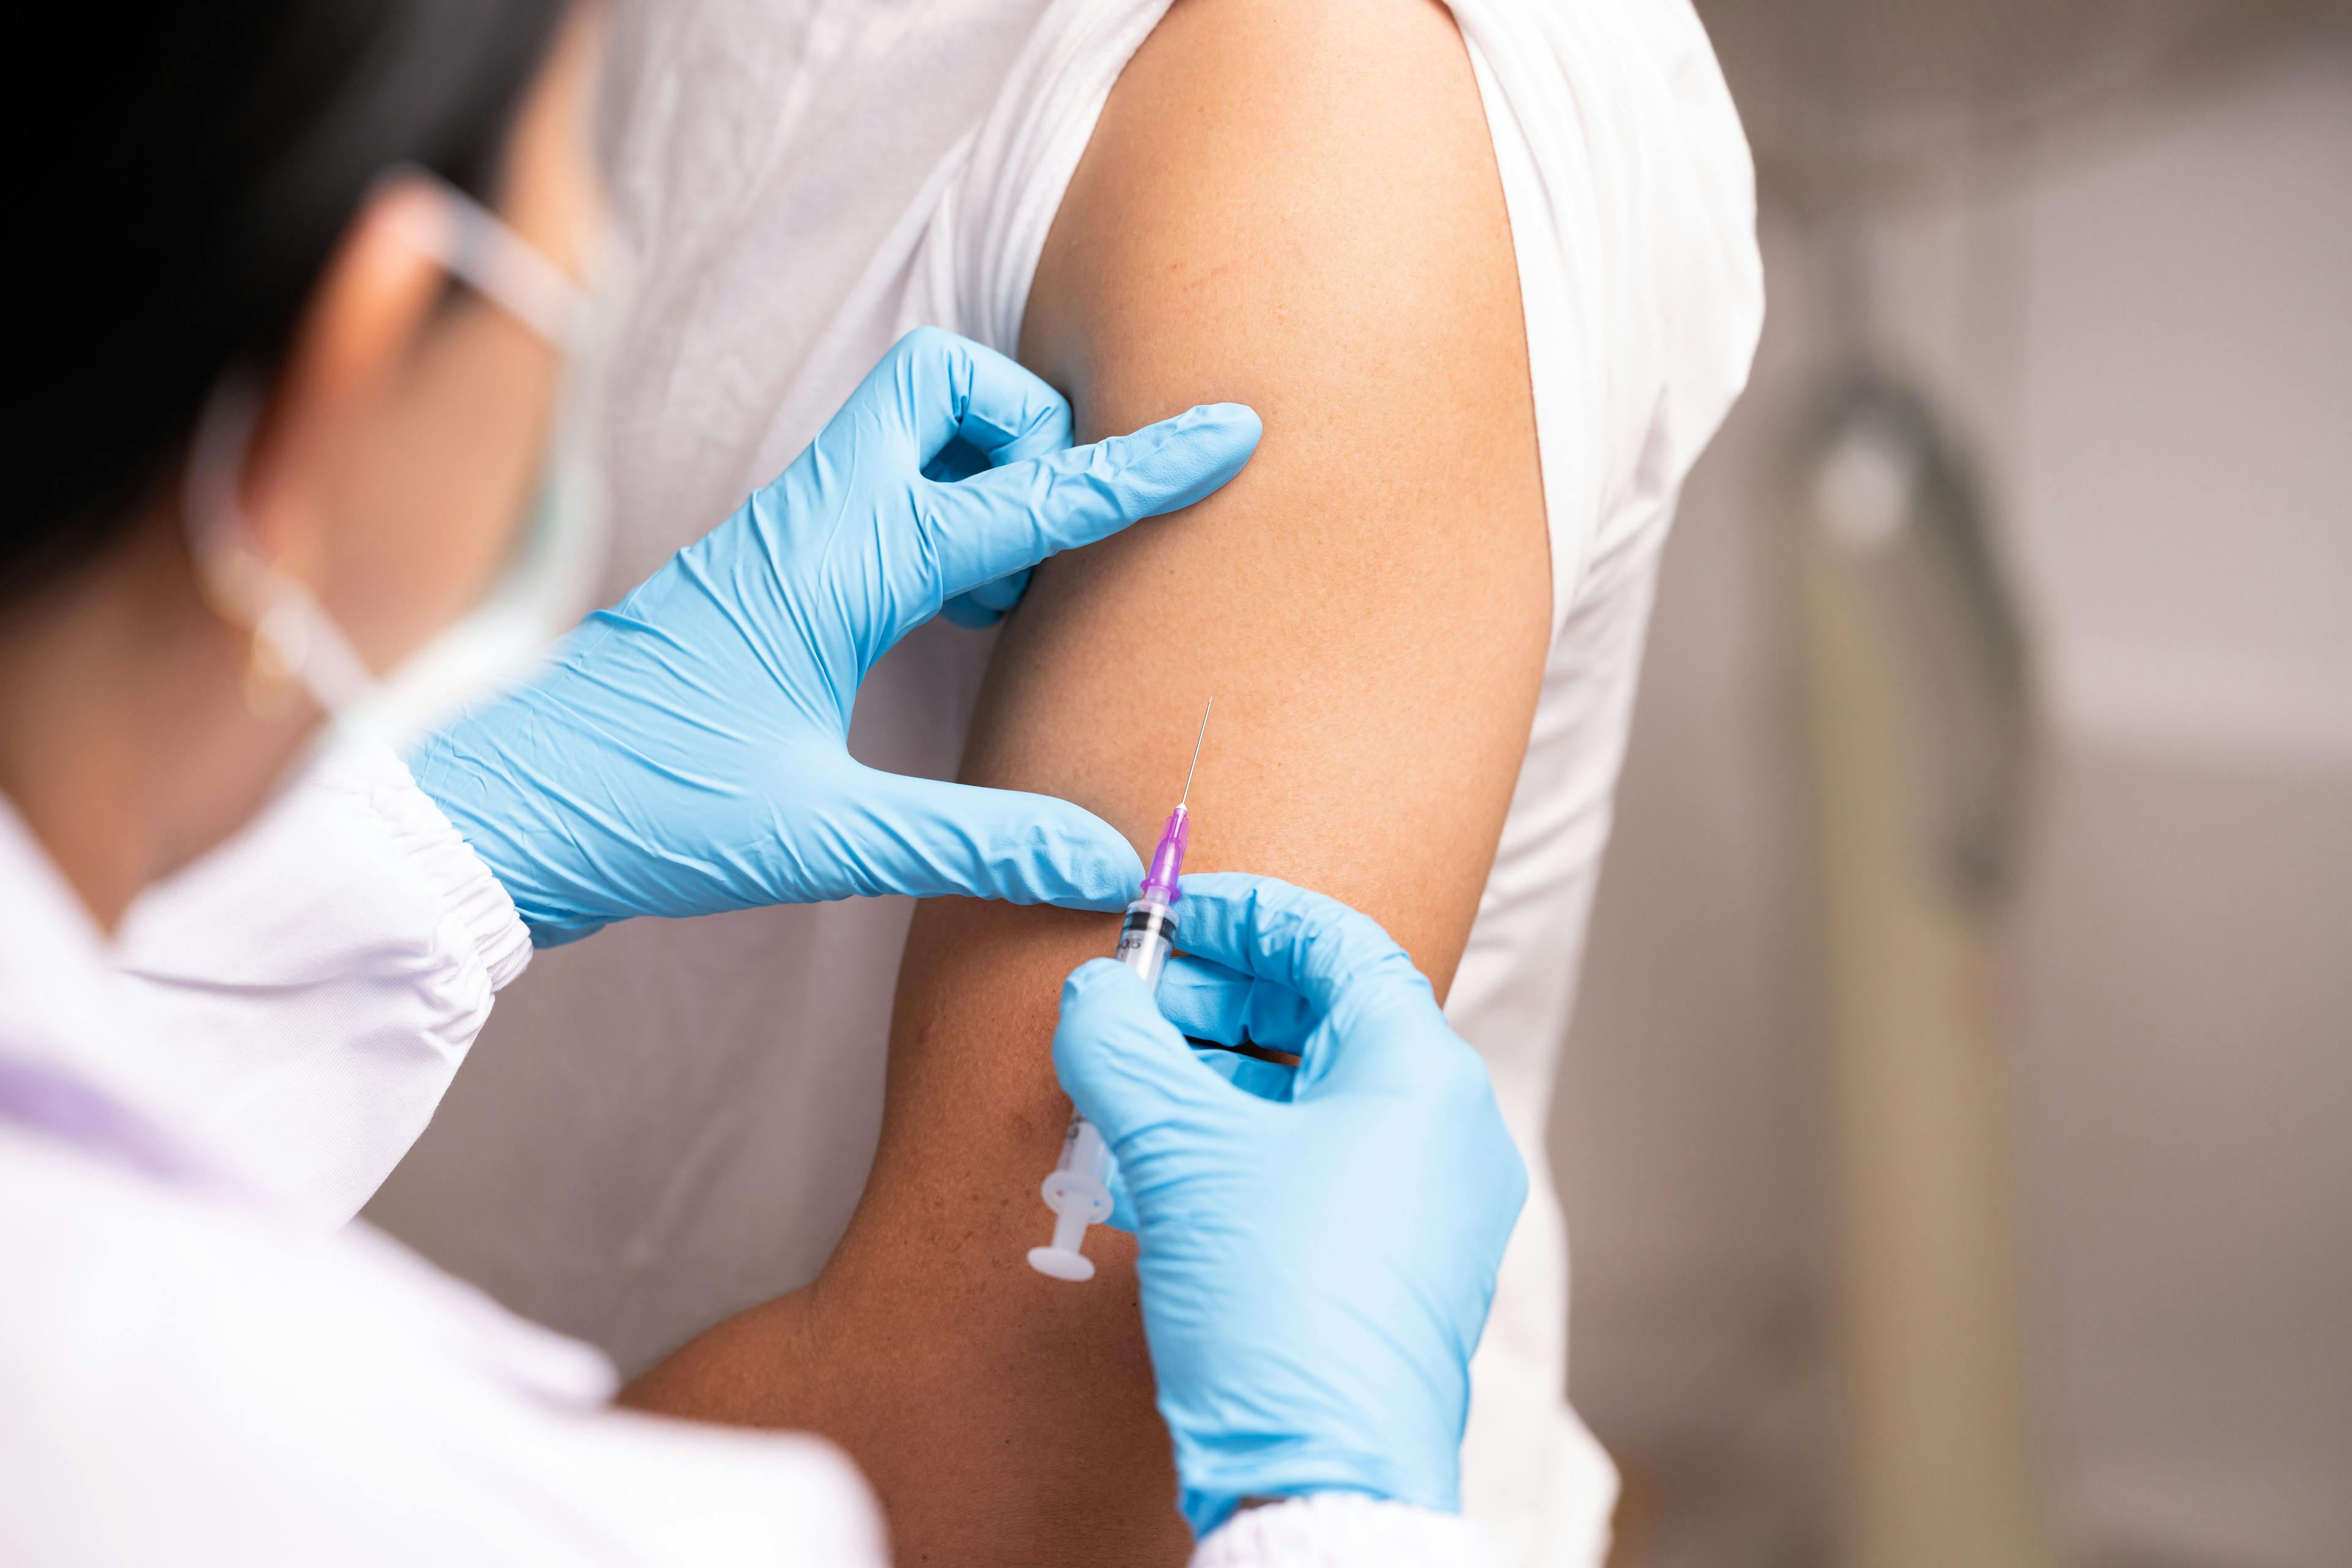 Minimal recovery in HPV vaccination reported in Japan despite recommendations | Image Credit: © arcyto - © arcyto - stock.adobe.com.